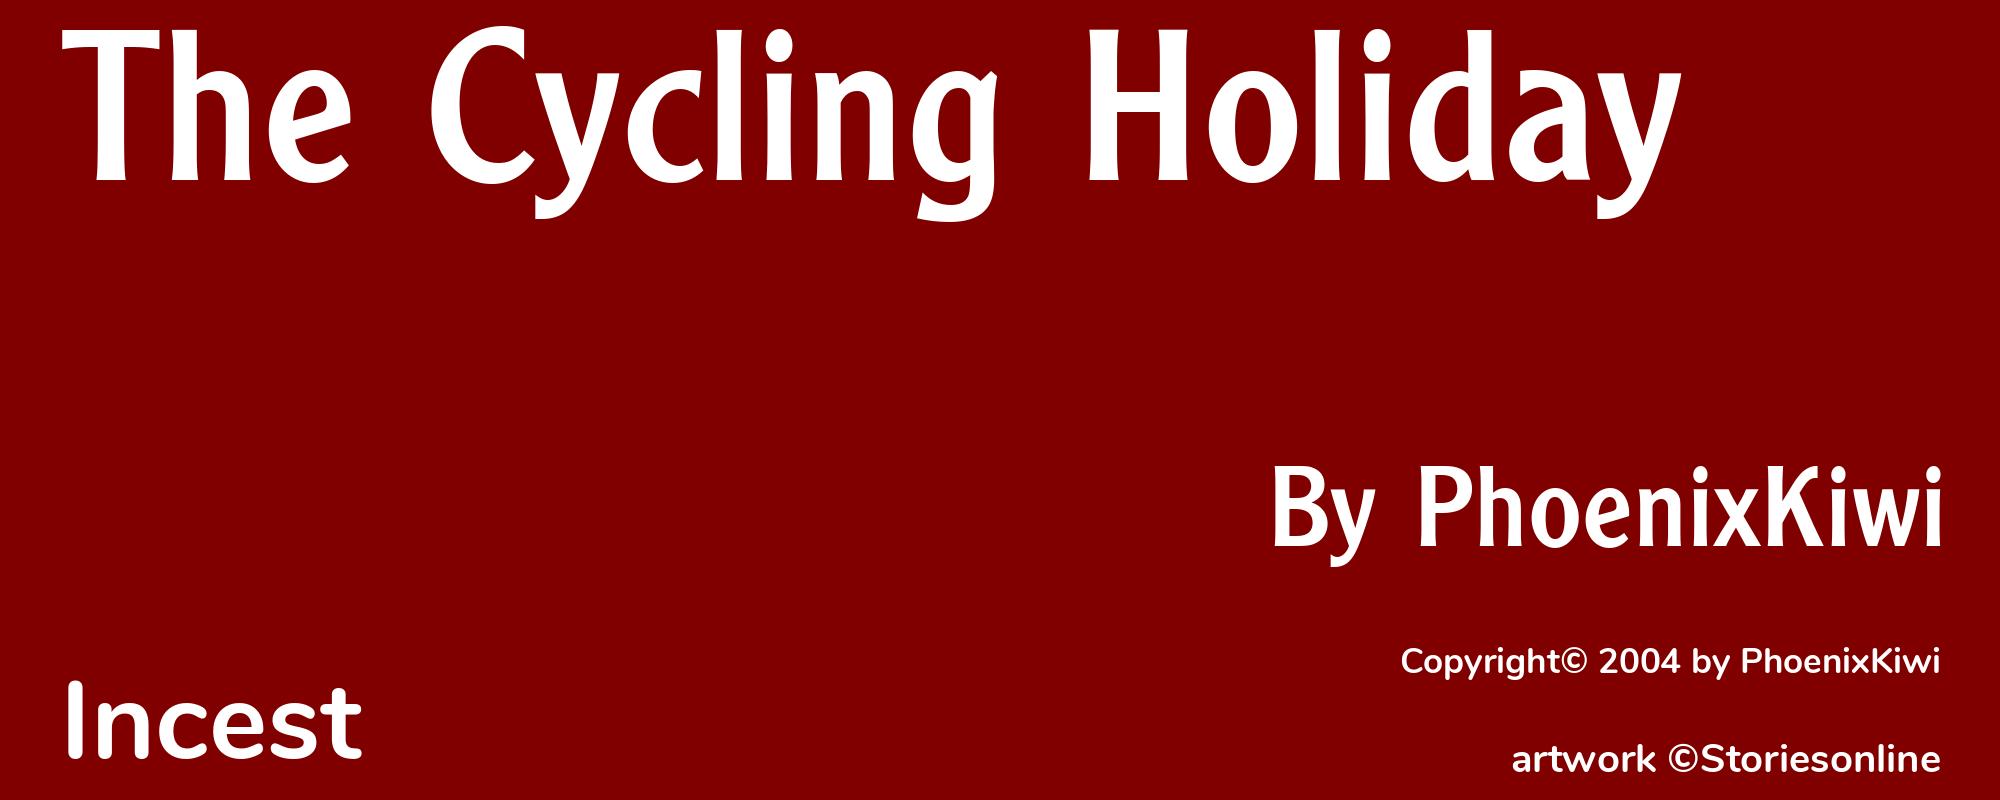 The Cycling Holiday - Cover